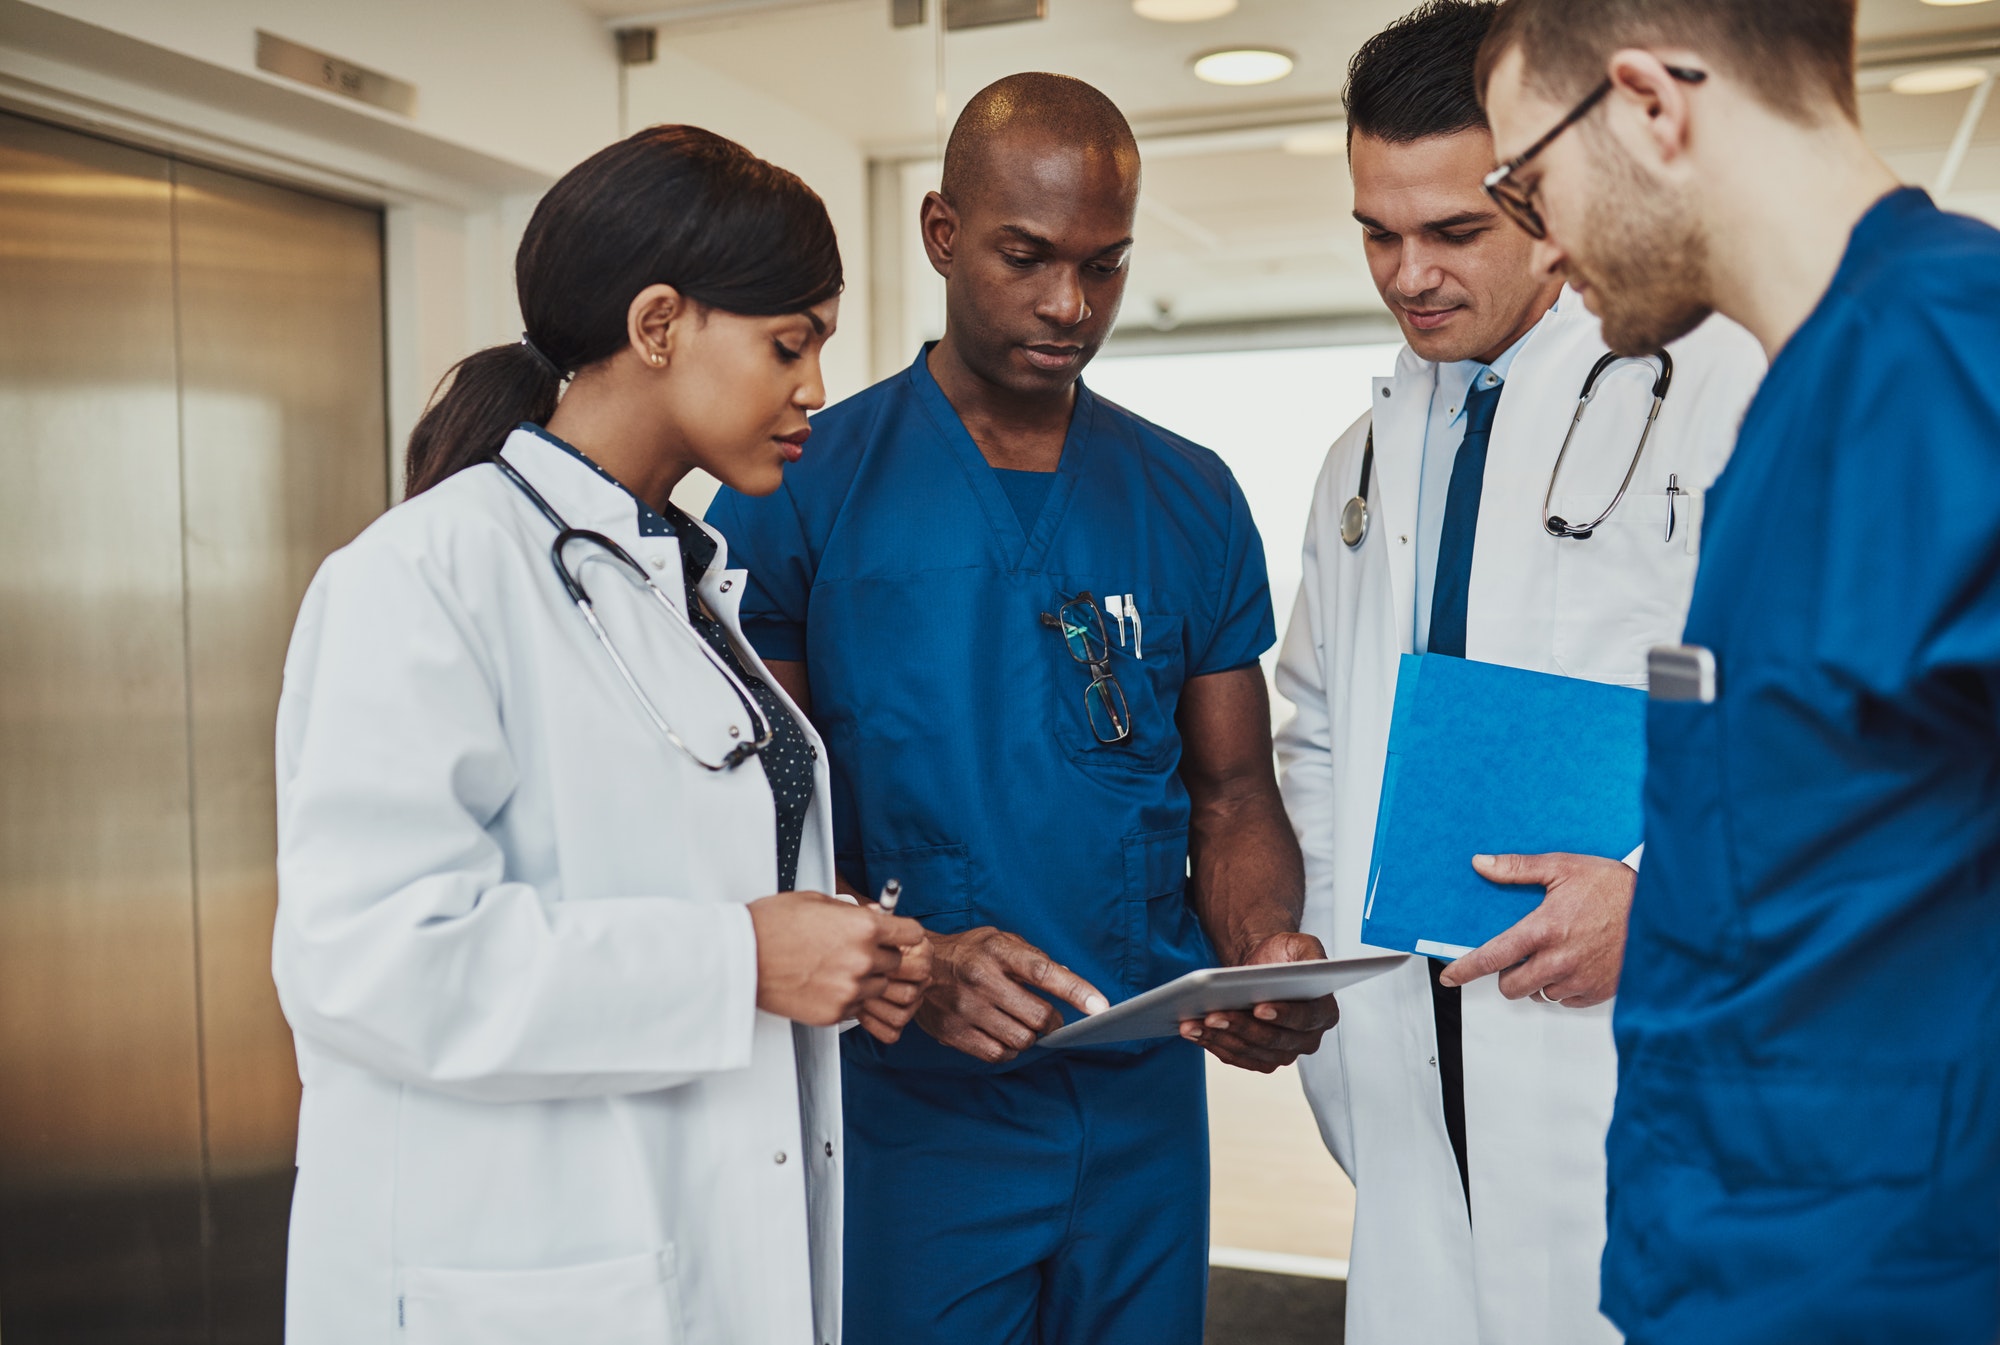 Multiracial team of doctors discussing a patient